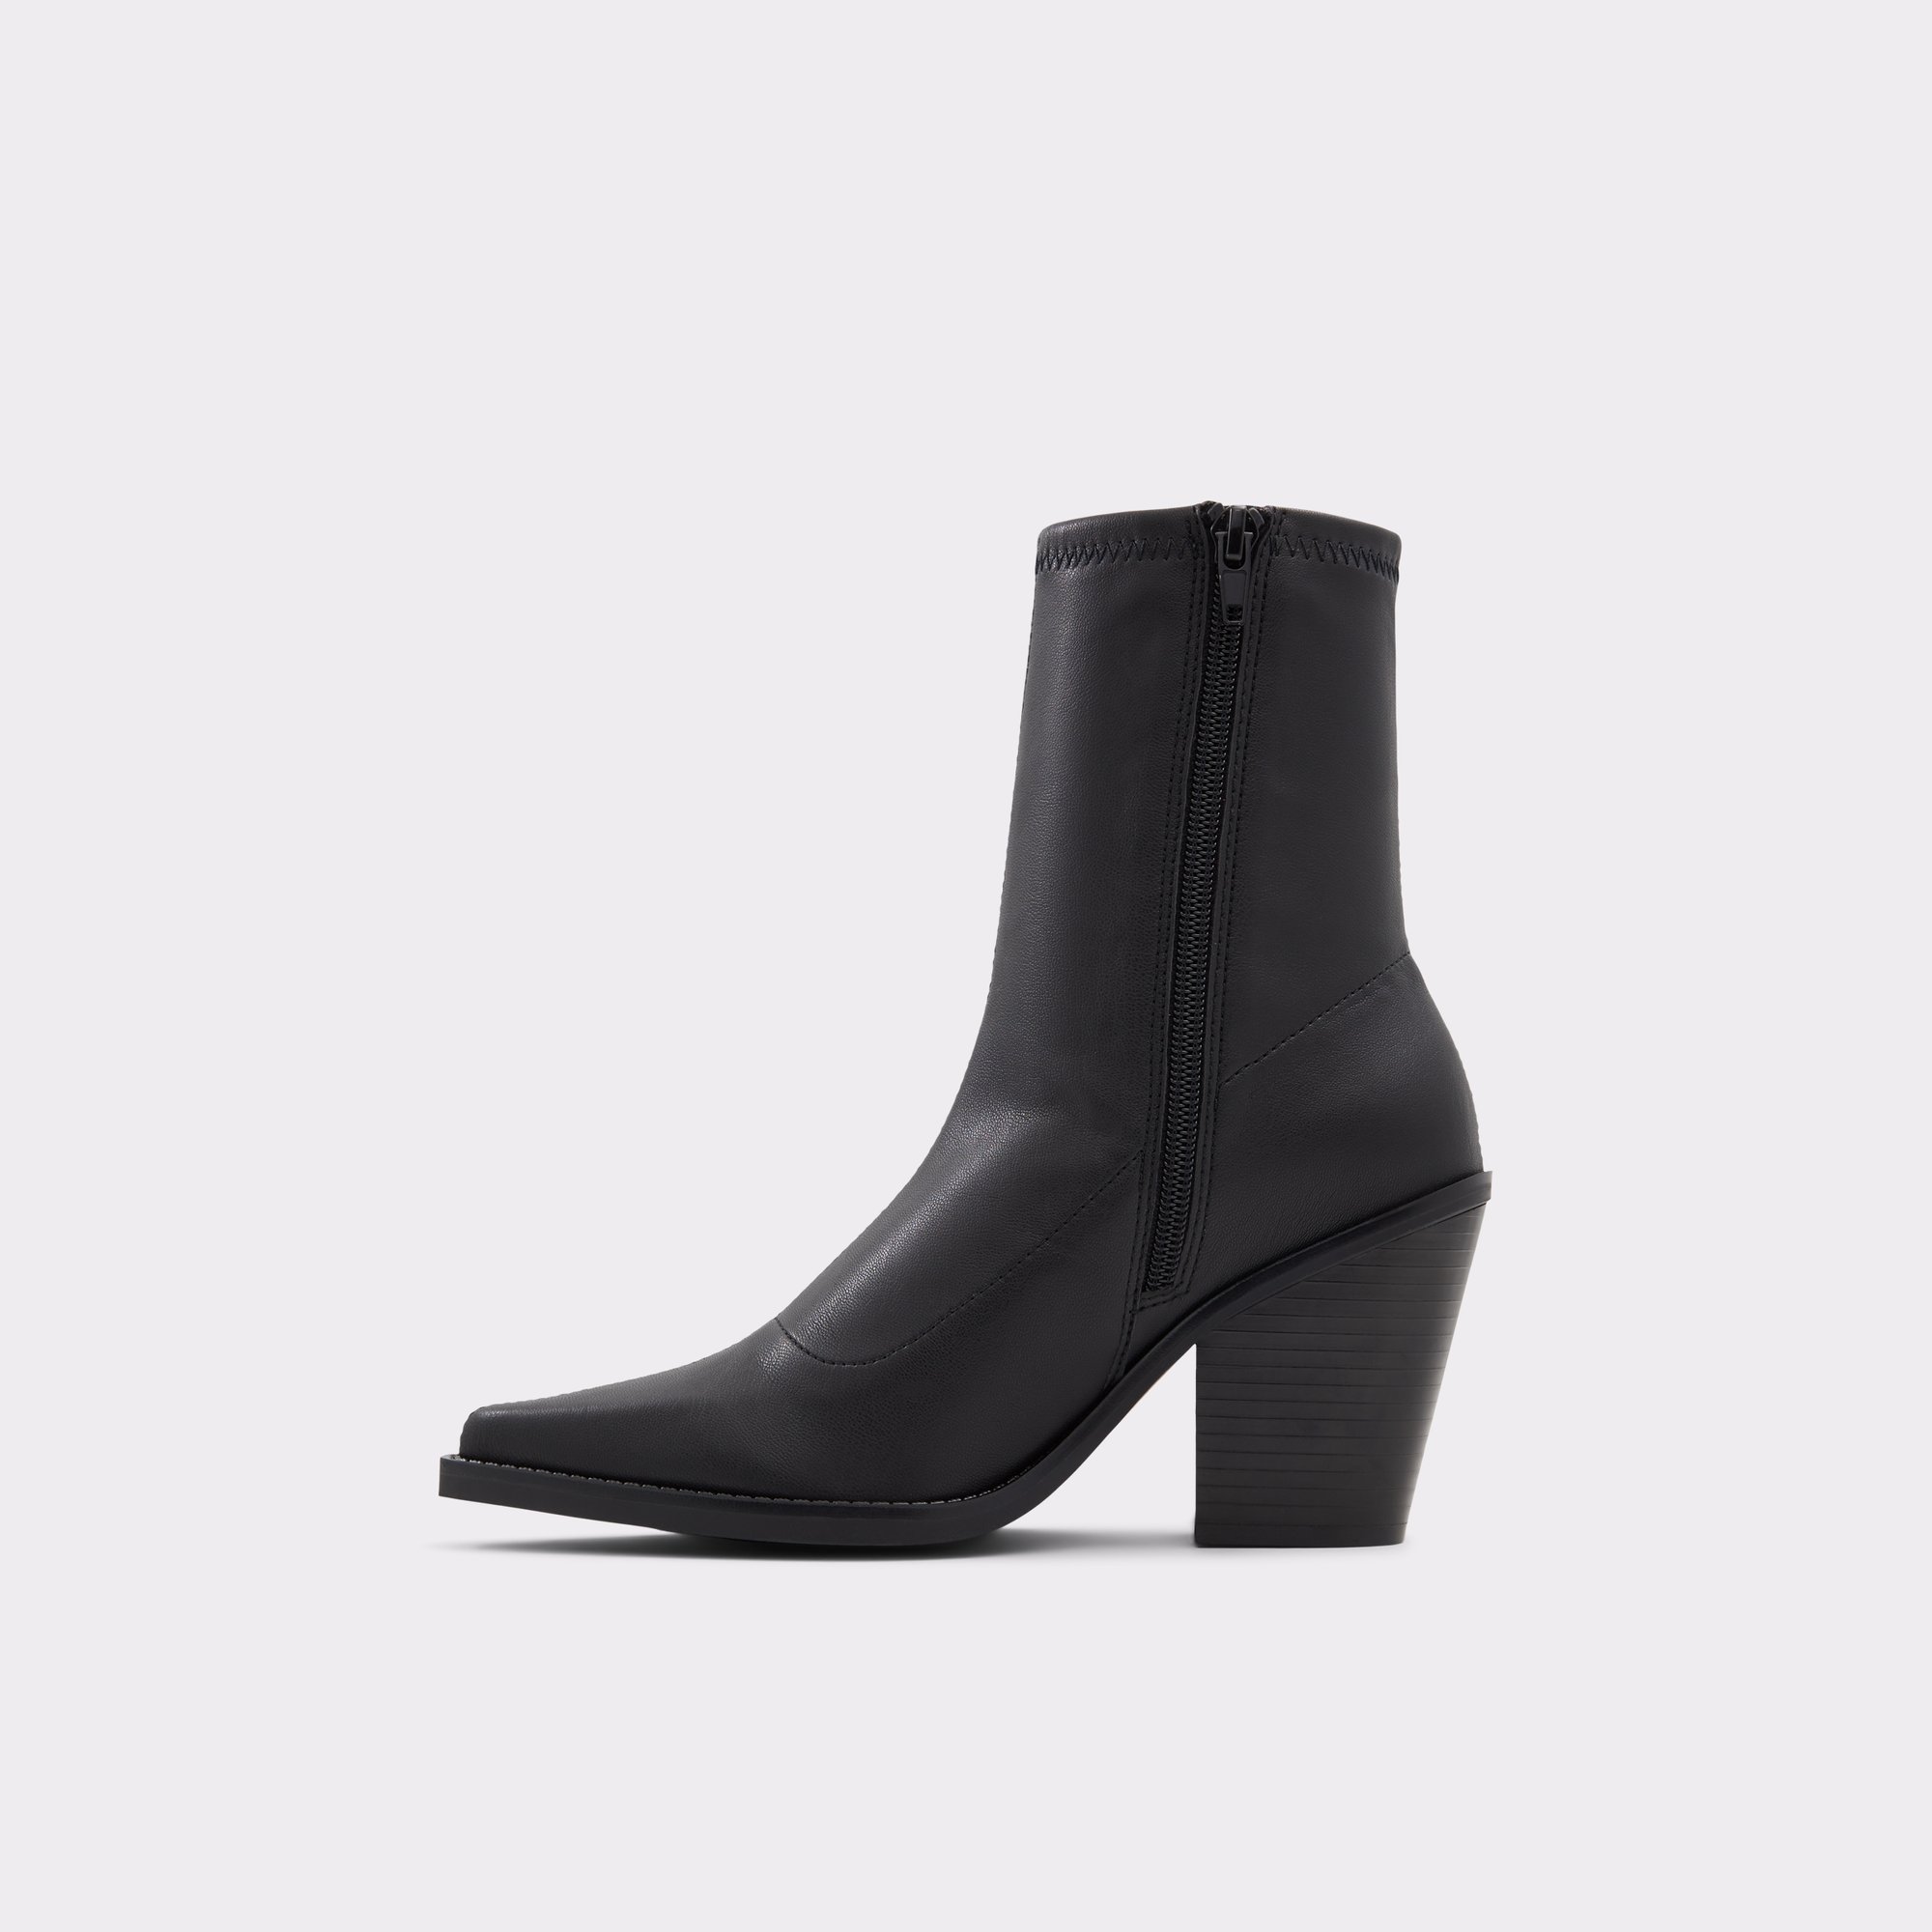 Bamboo Black Women's Ankle Boots | ALDO US